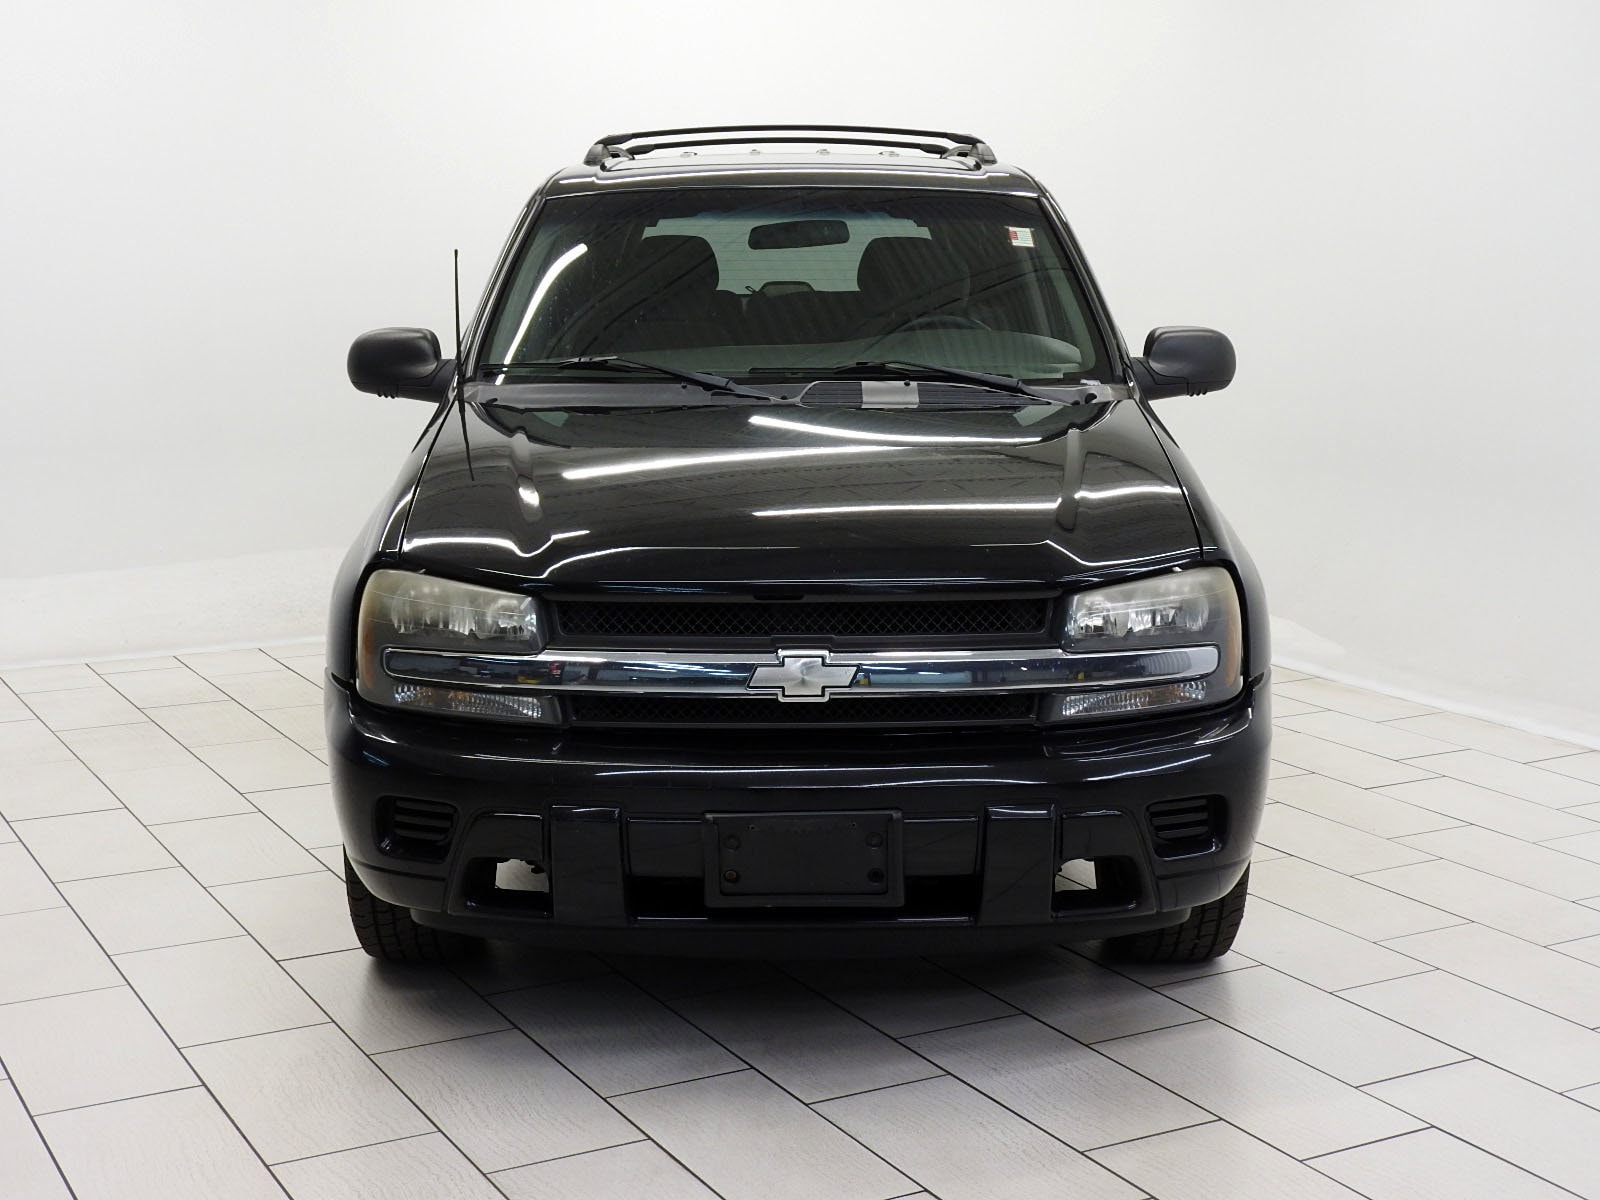 Used 2002 Chevrolet TrailBlazer LS with VIN 1GNDS13S622203777 for sale in Charlotte, NC